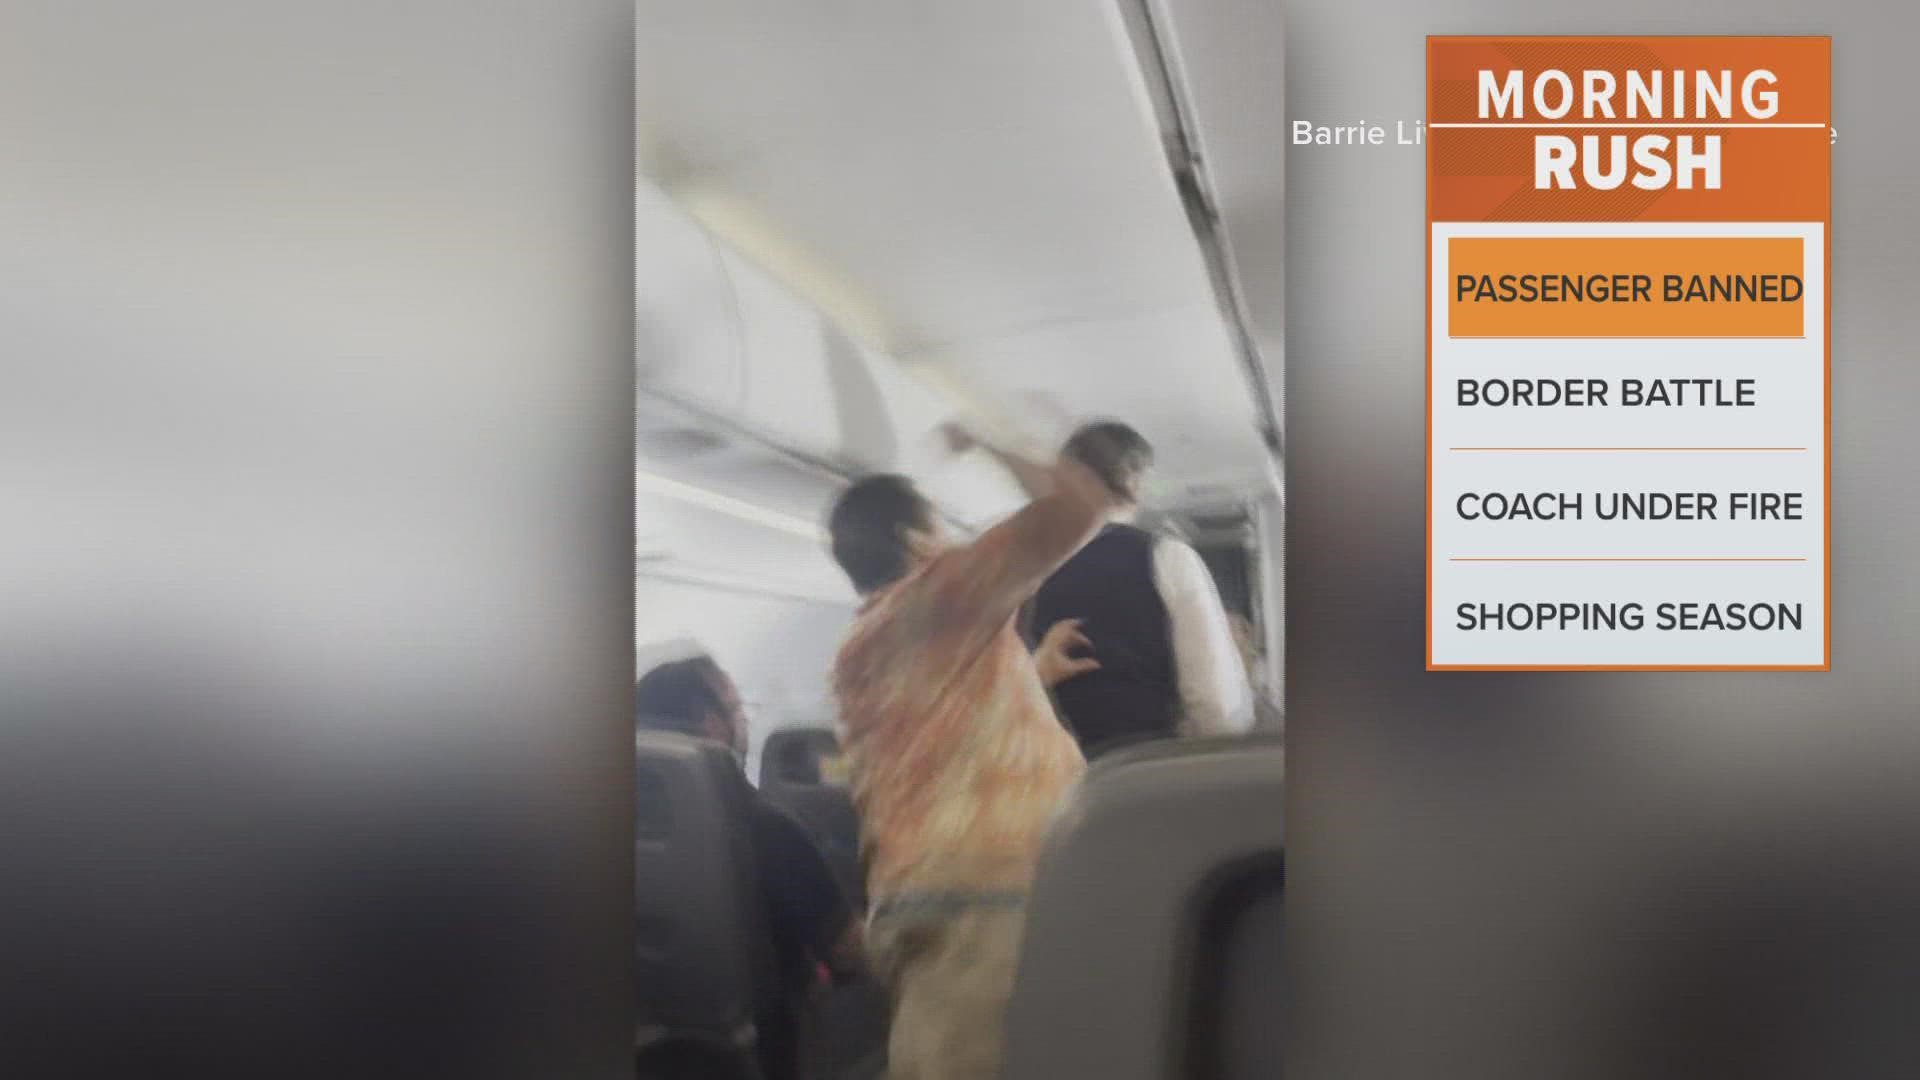 The assault was captured on video during a flight from Cabo to Los Angeles.